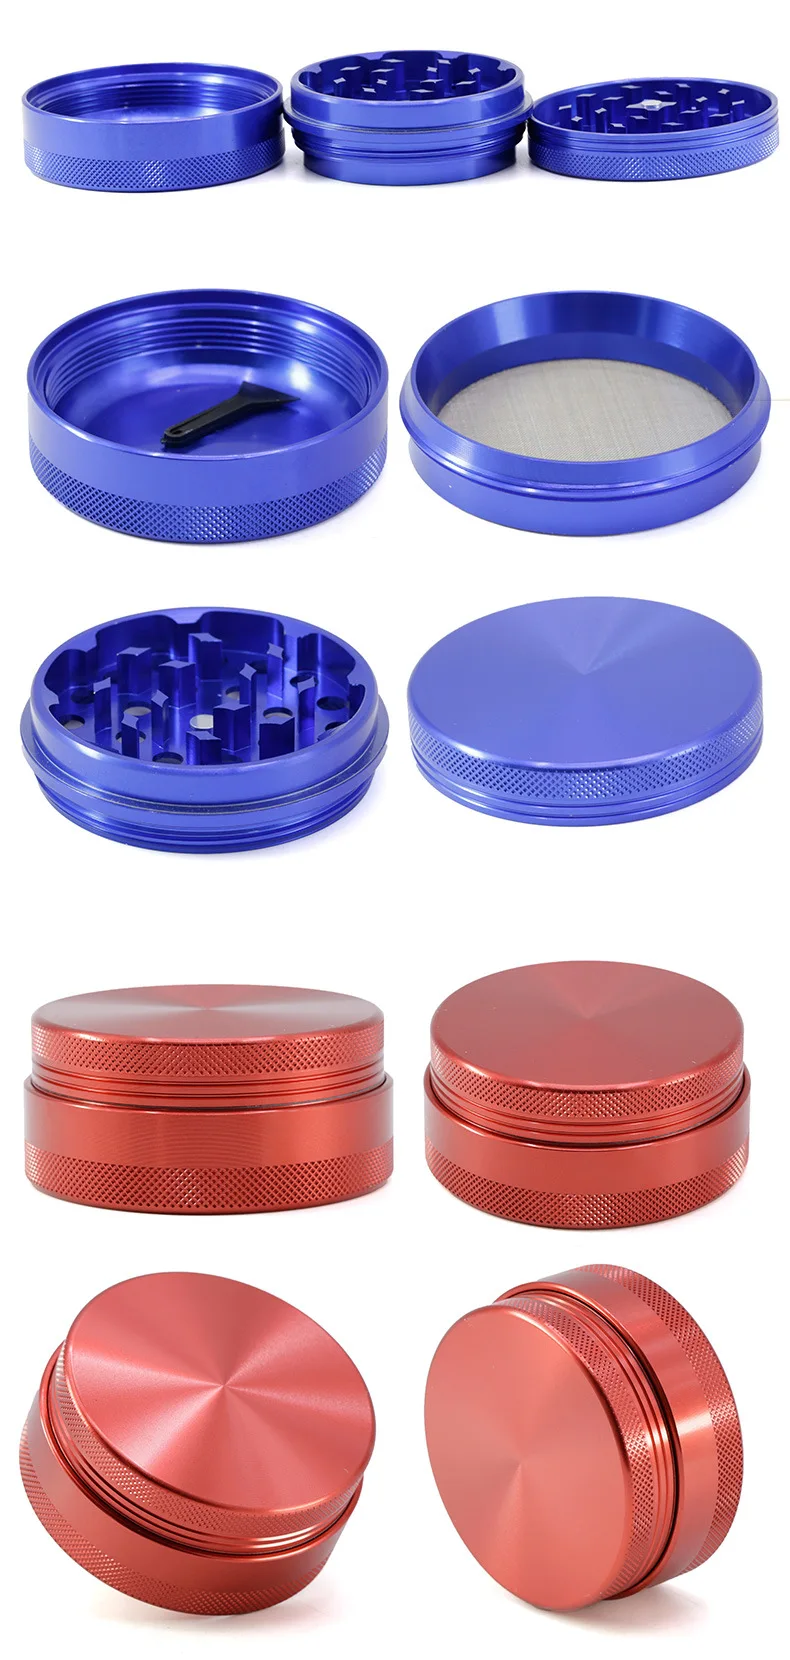 New style compressed version 2 layers visible 4 parts Aluminum alloy 65mm inner rotatable screen herb tobacco grinder